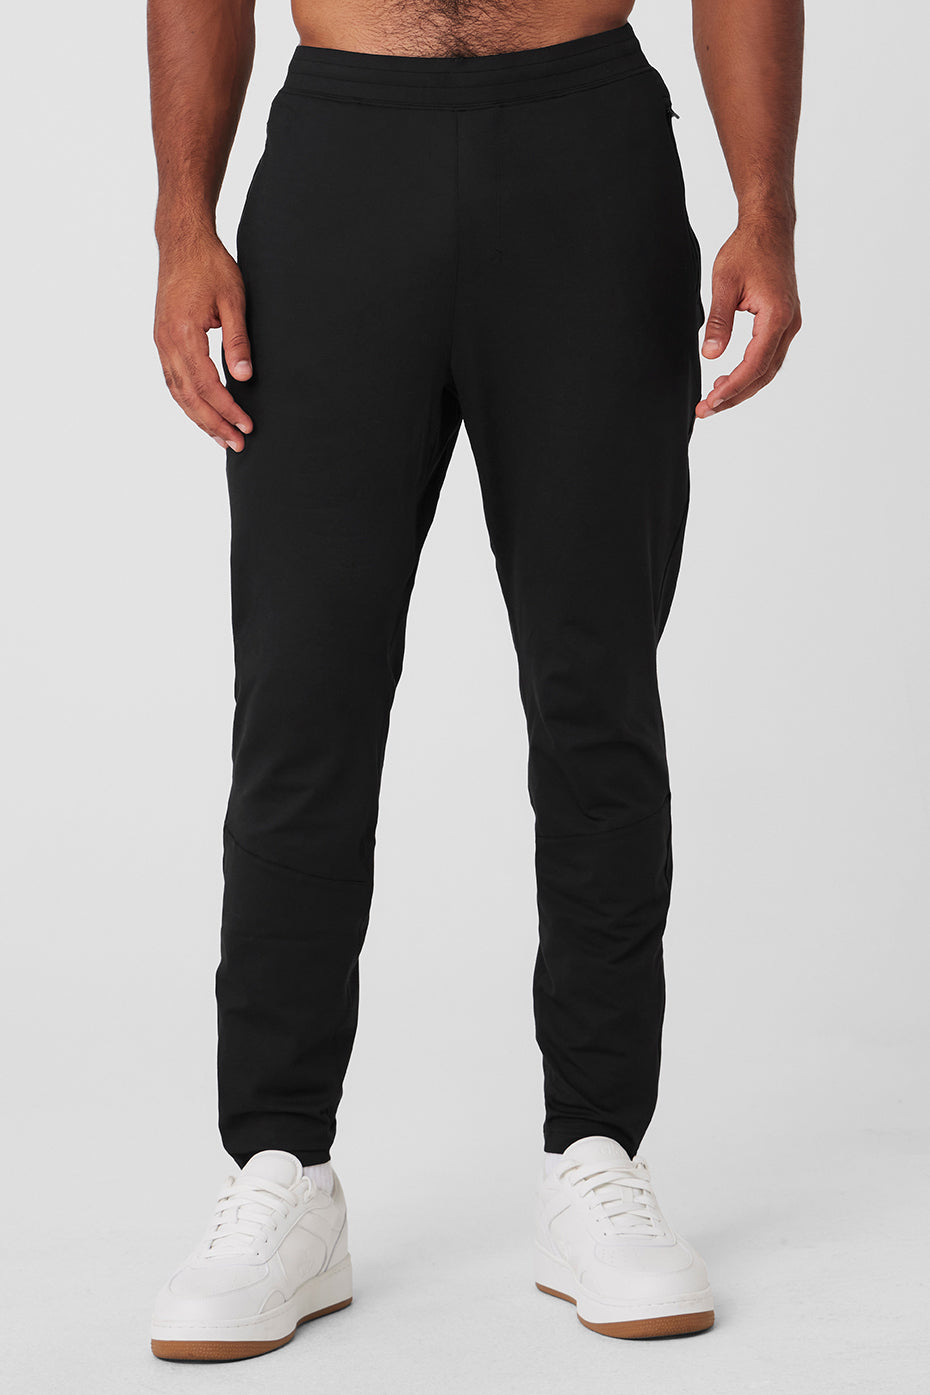 Conquer React Performance Pant - Black